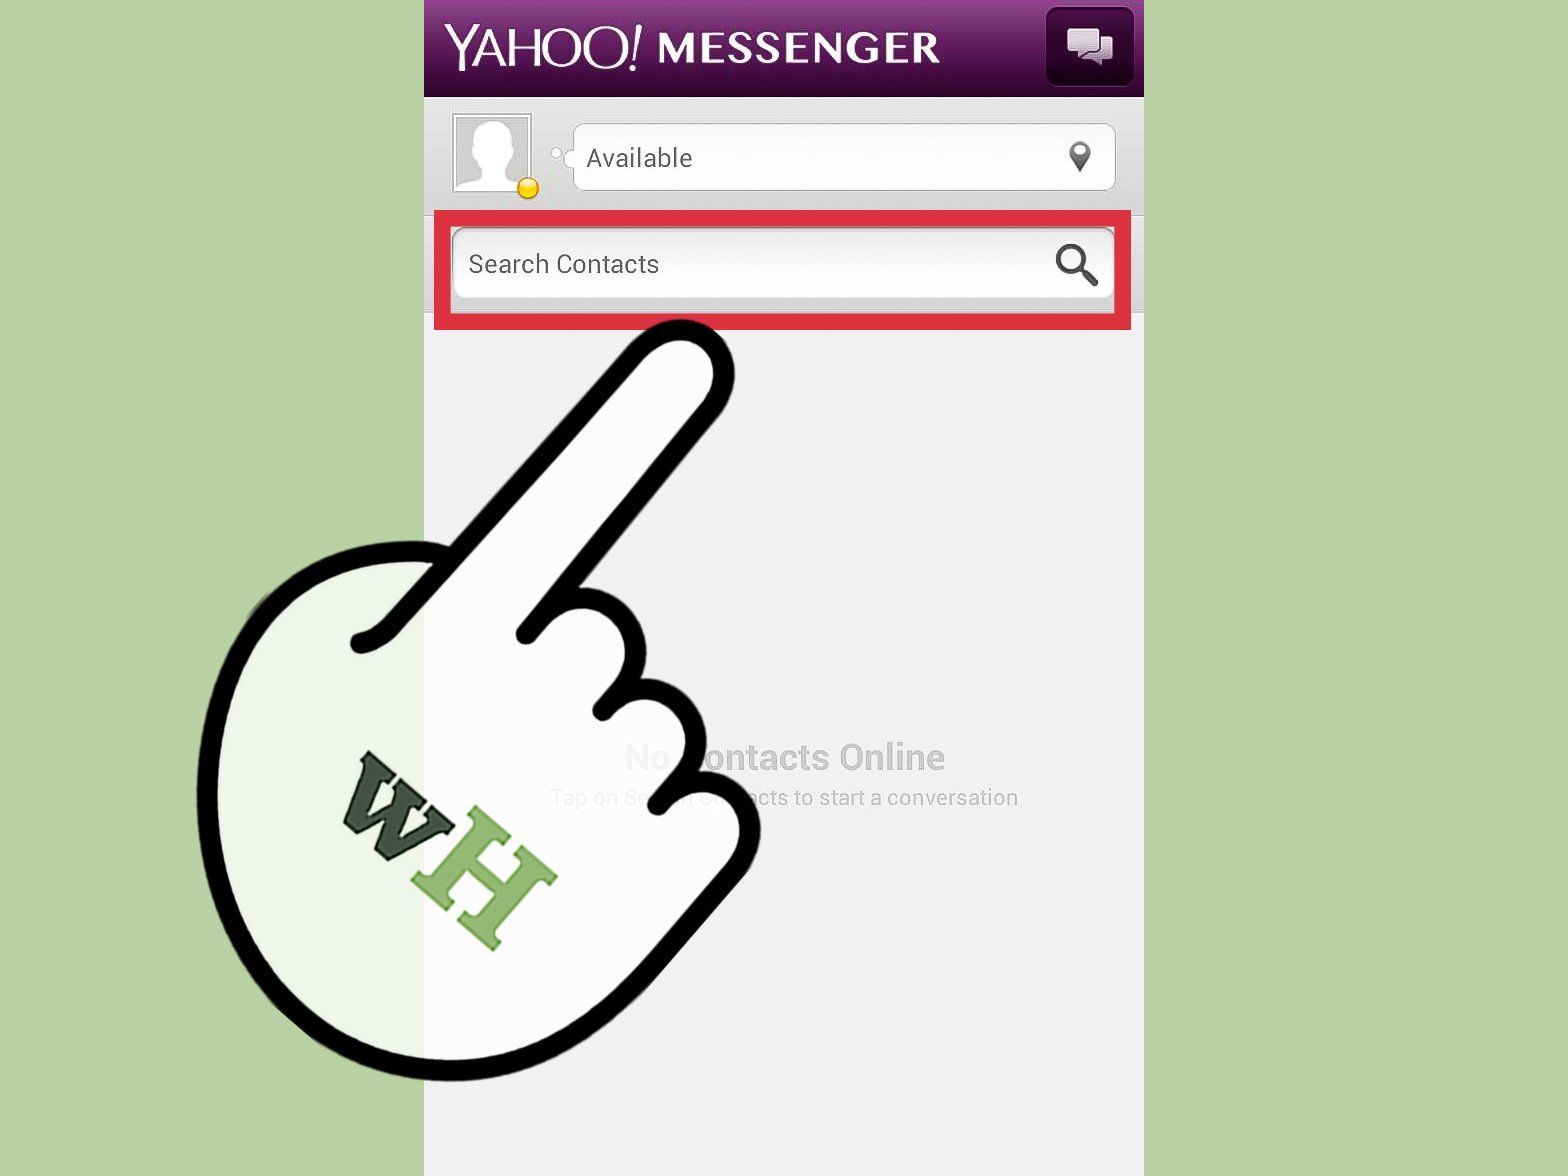 How to search for someone on yahoo messenger